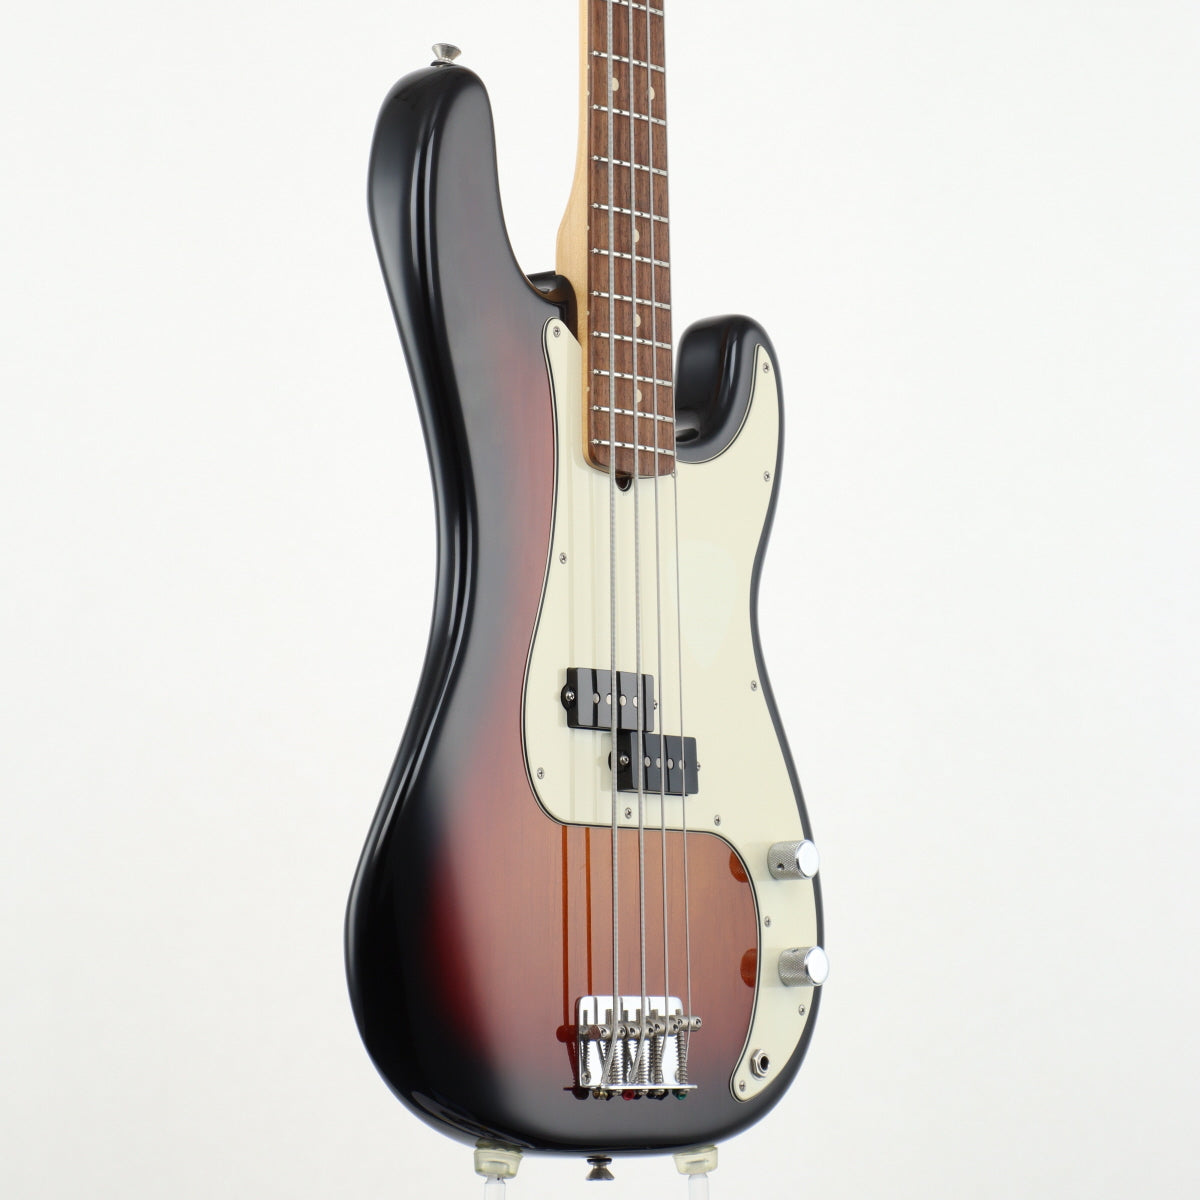 [SN US13059425] USED Fender USA / American Special Precision Bass 3 Color Sunburst [11]